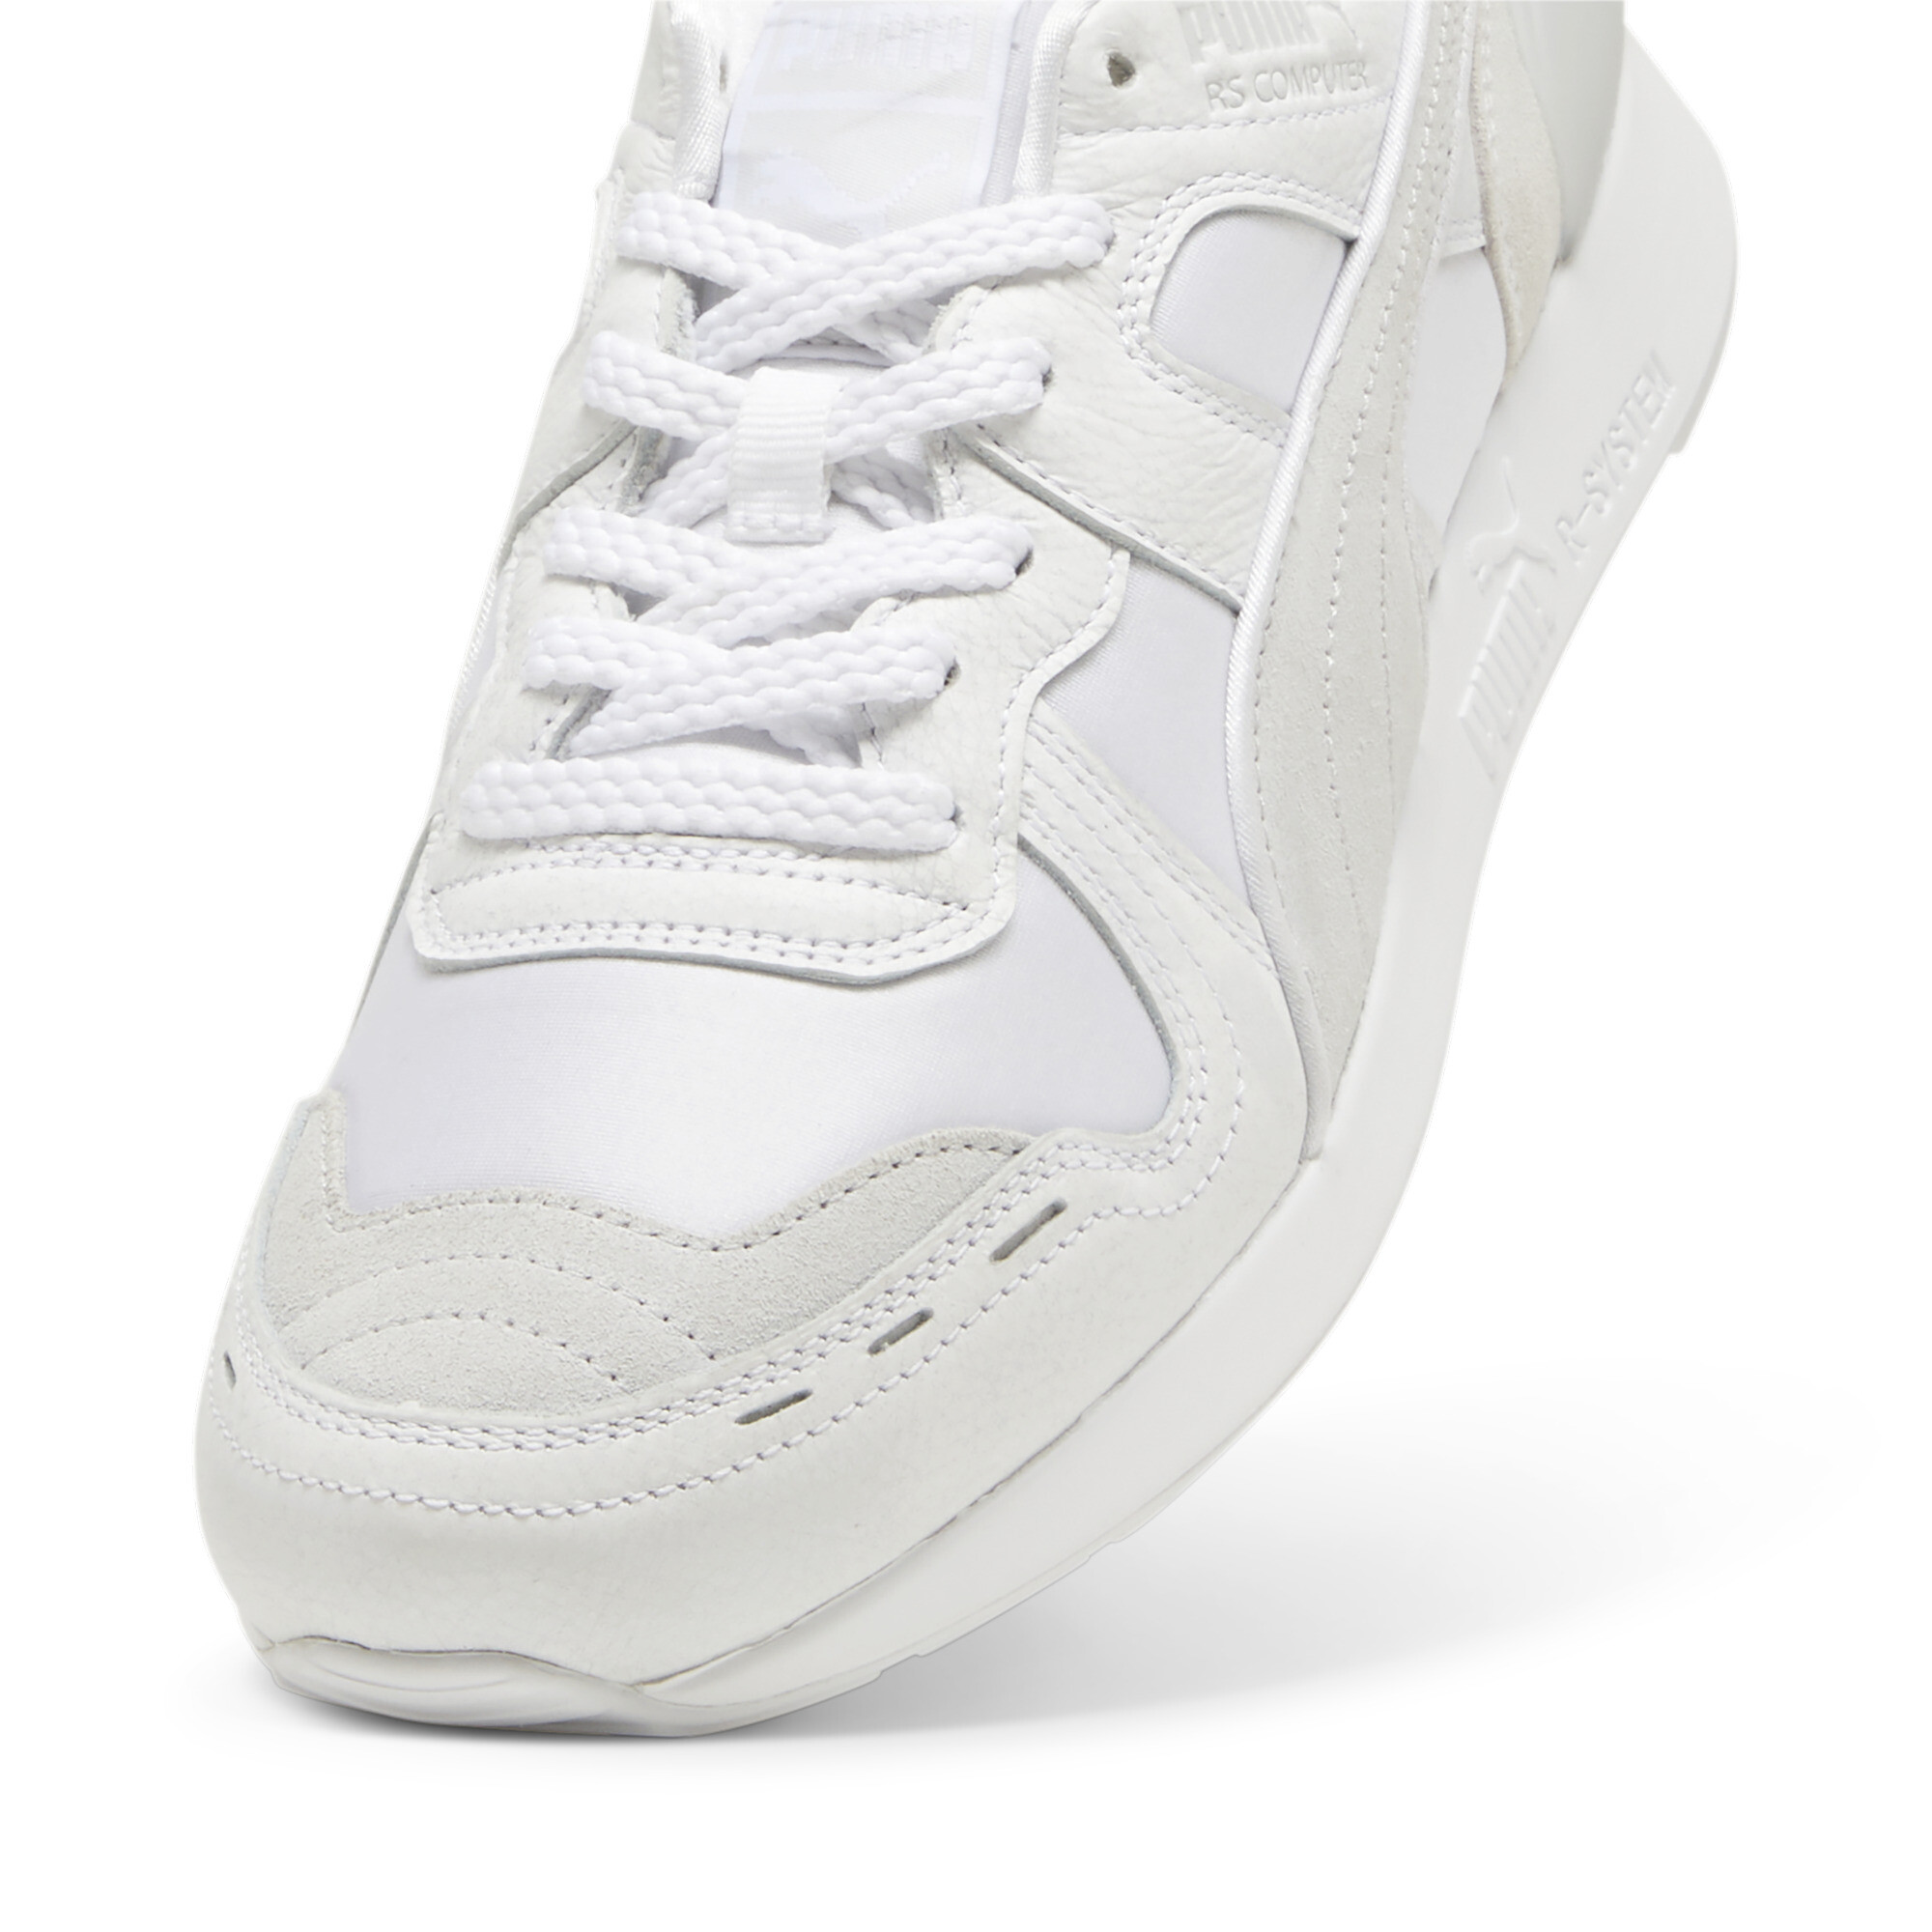 Puma RS-100 40th Anniversary Sneakers, White, Size 38.5, Shoes